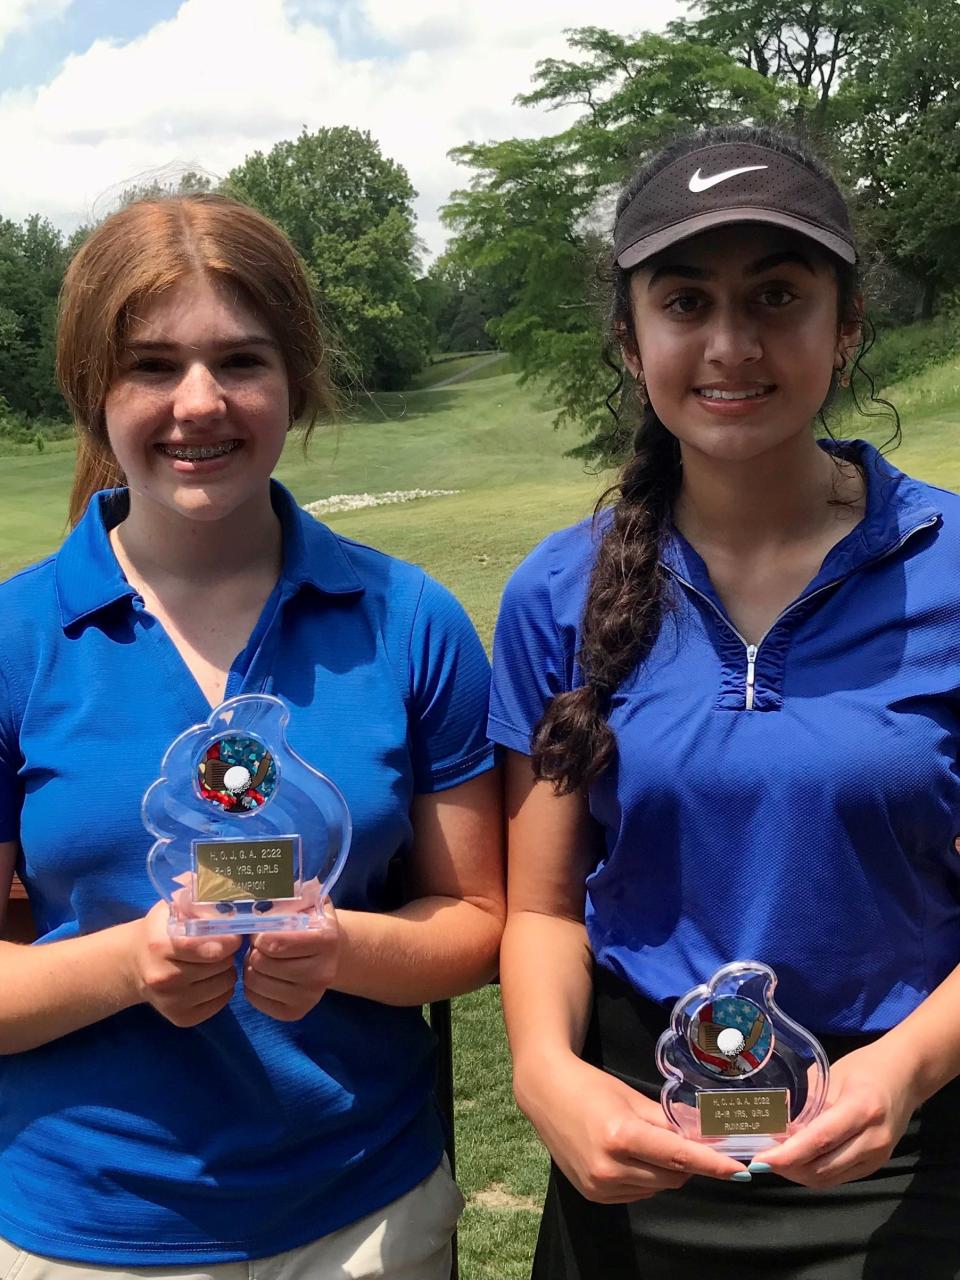 Pleasant's Dina Shah, right, and Maura Murphy finished 1-2 at the Colt Classic in helping the Spartans to a team title at the girls golf tournament. Shah was medalist with an even-par 64, while Murphy was second with a 66.